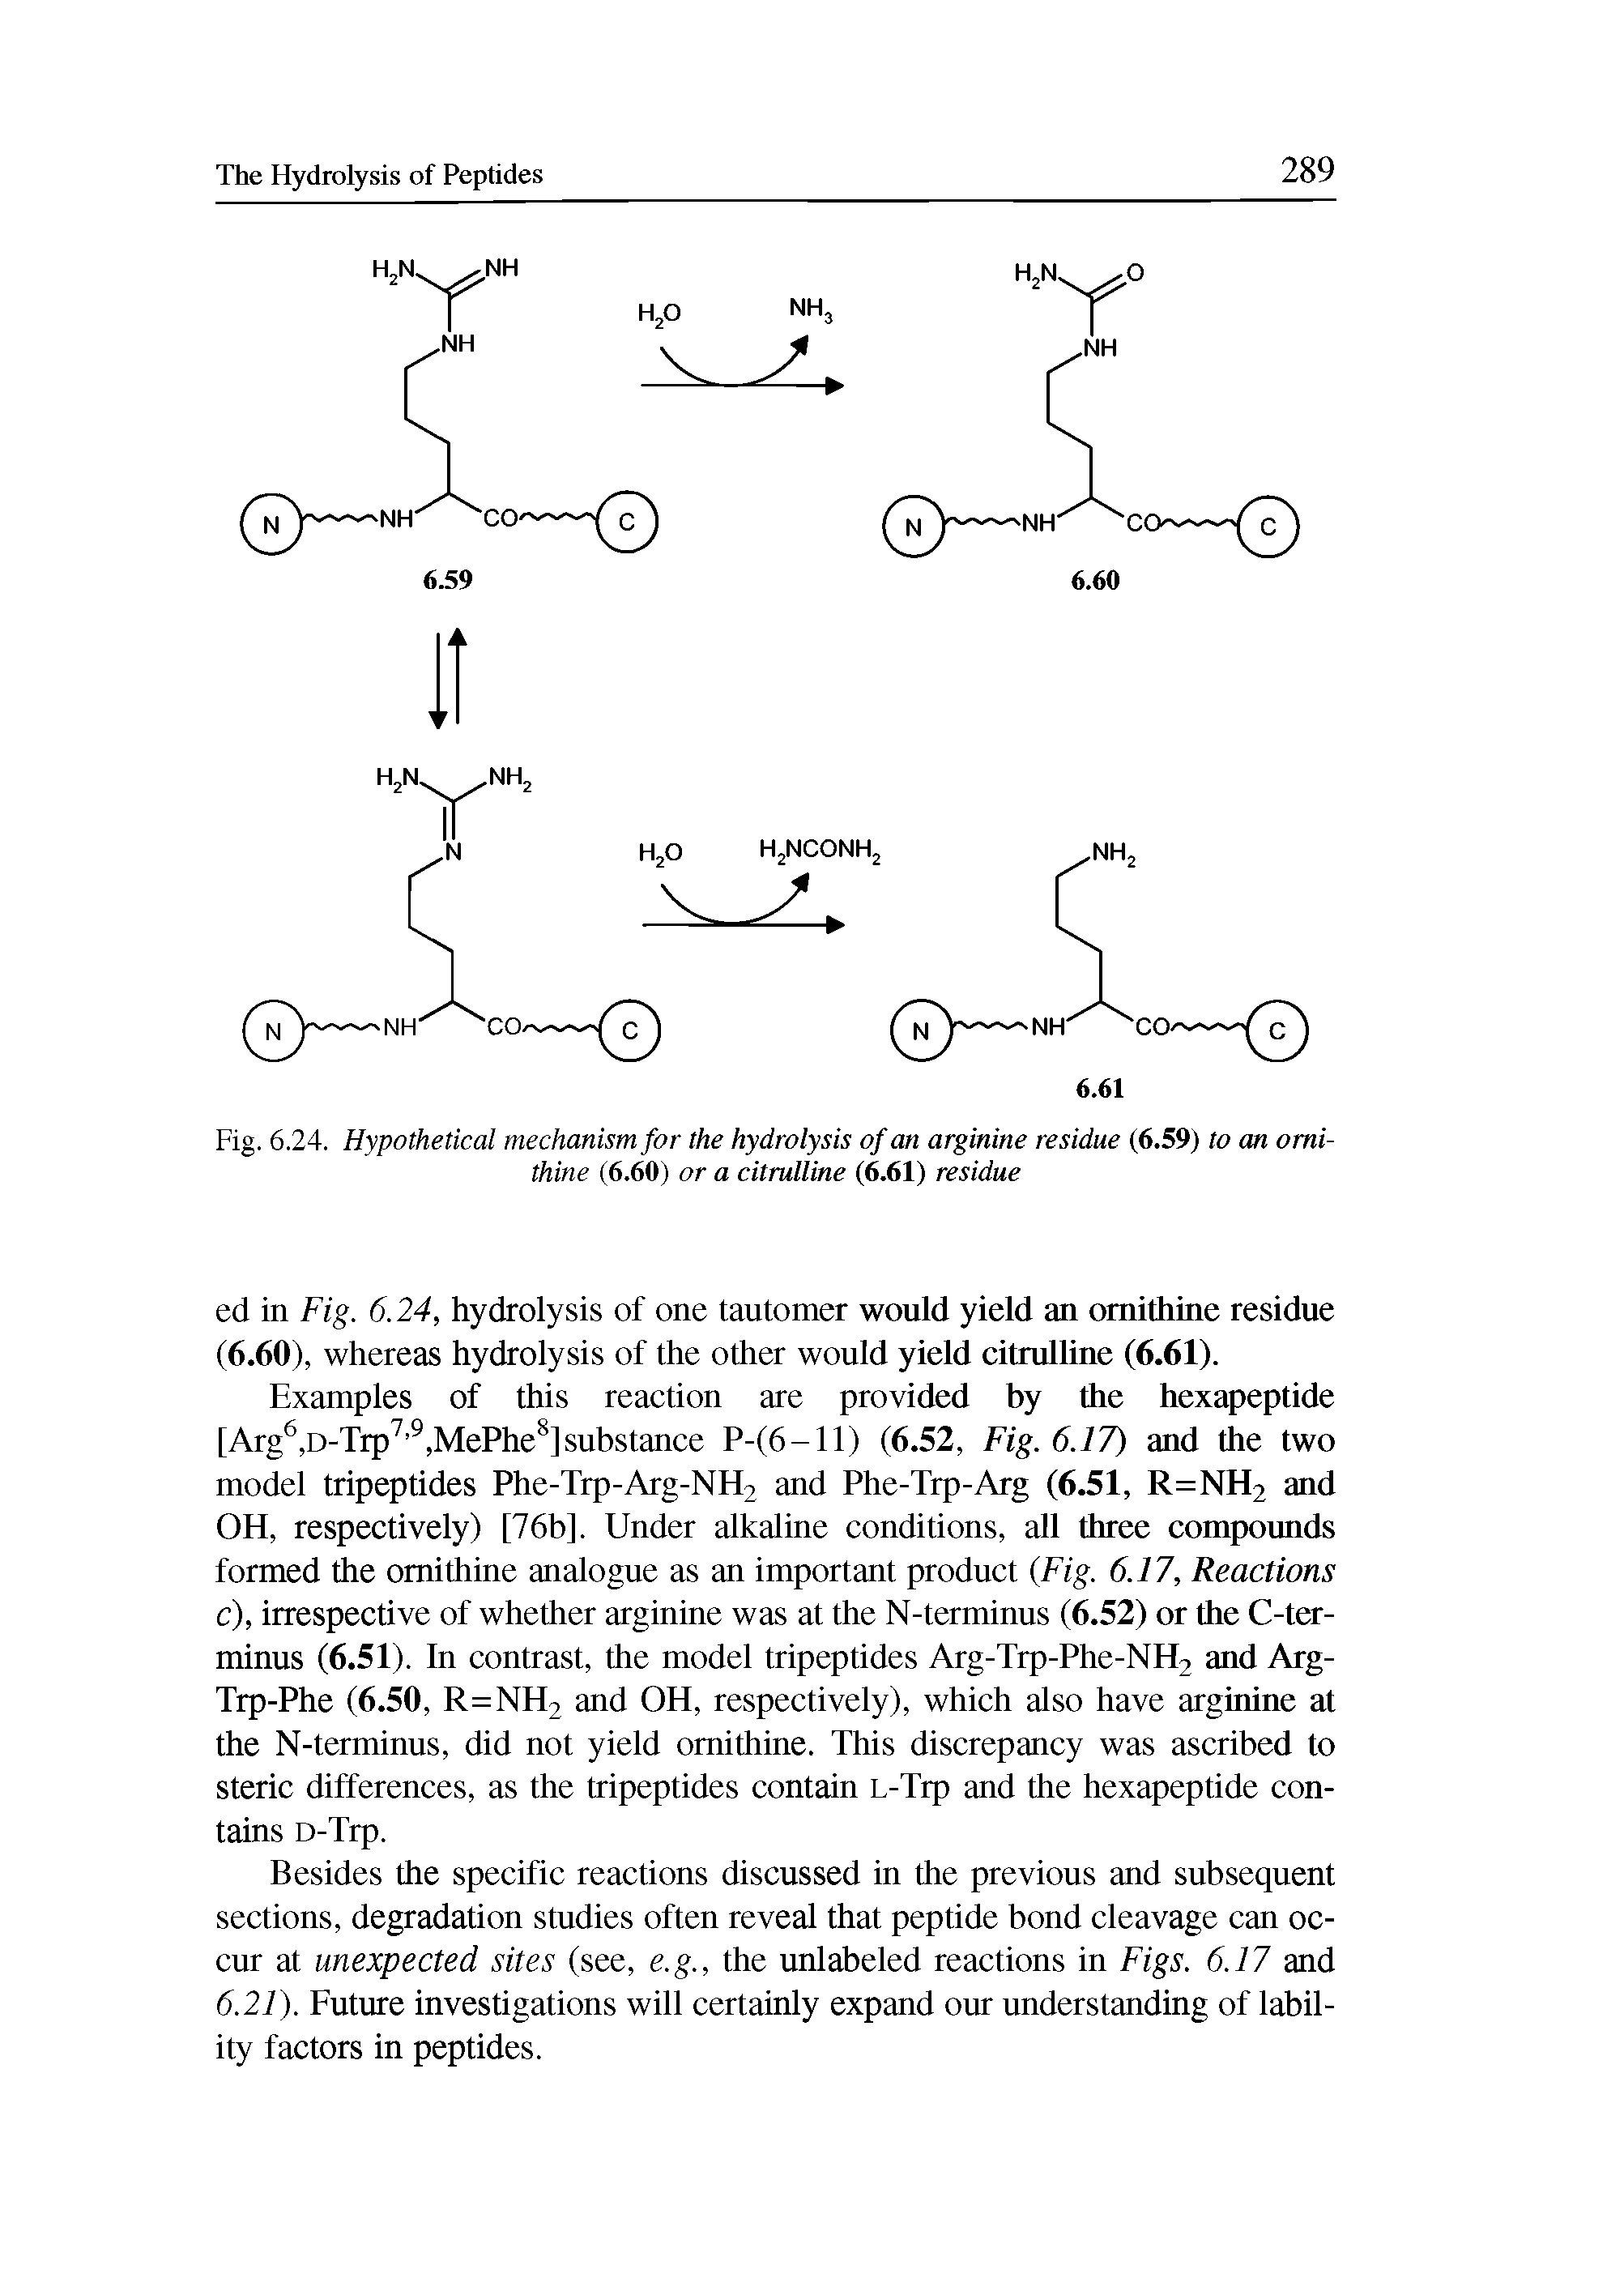 Fig. 6.24. Hypothetical mechanism for the hydrolysis of an arginine residue (6.59) to an ornithine (6.60) or a citrulline (6.61) residue...